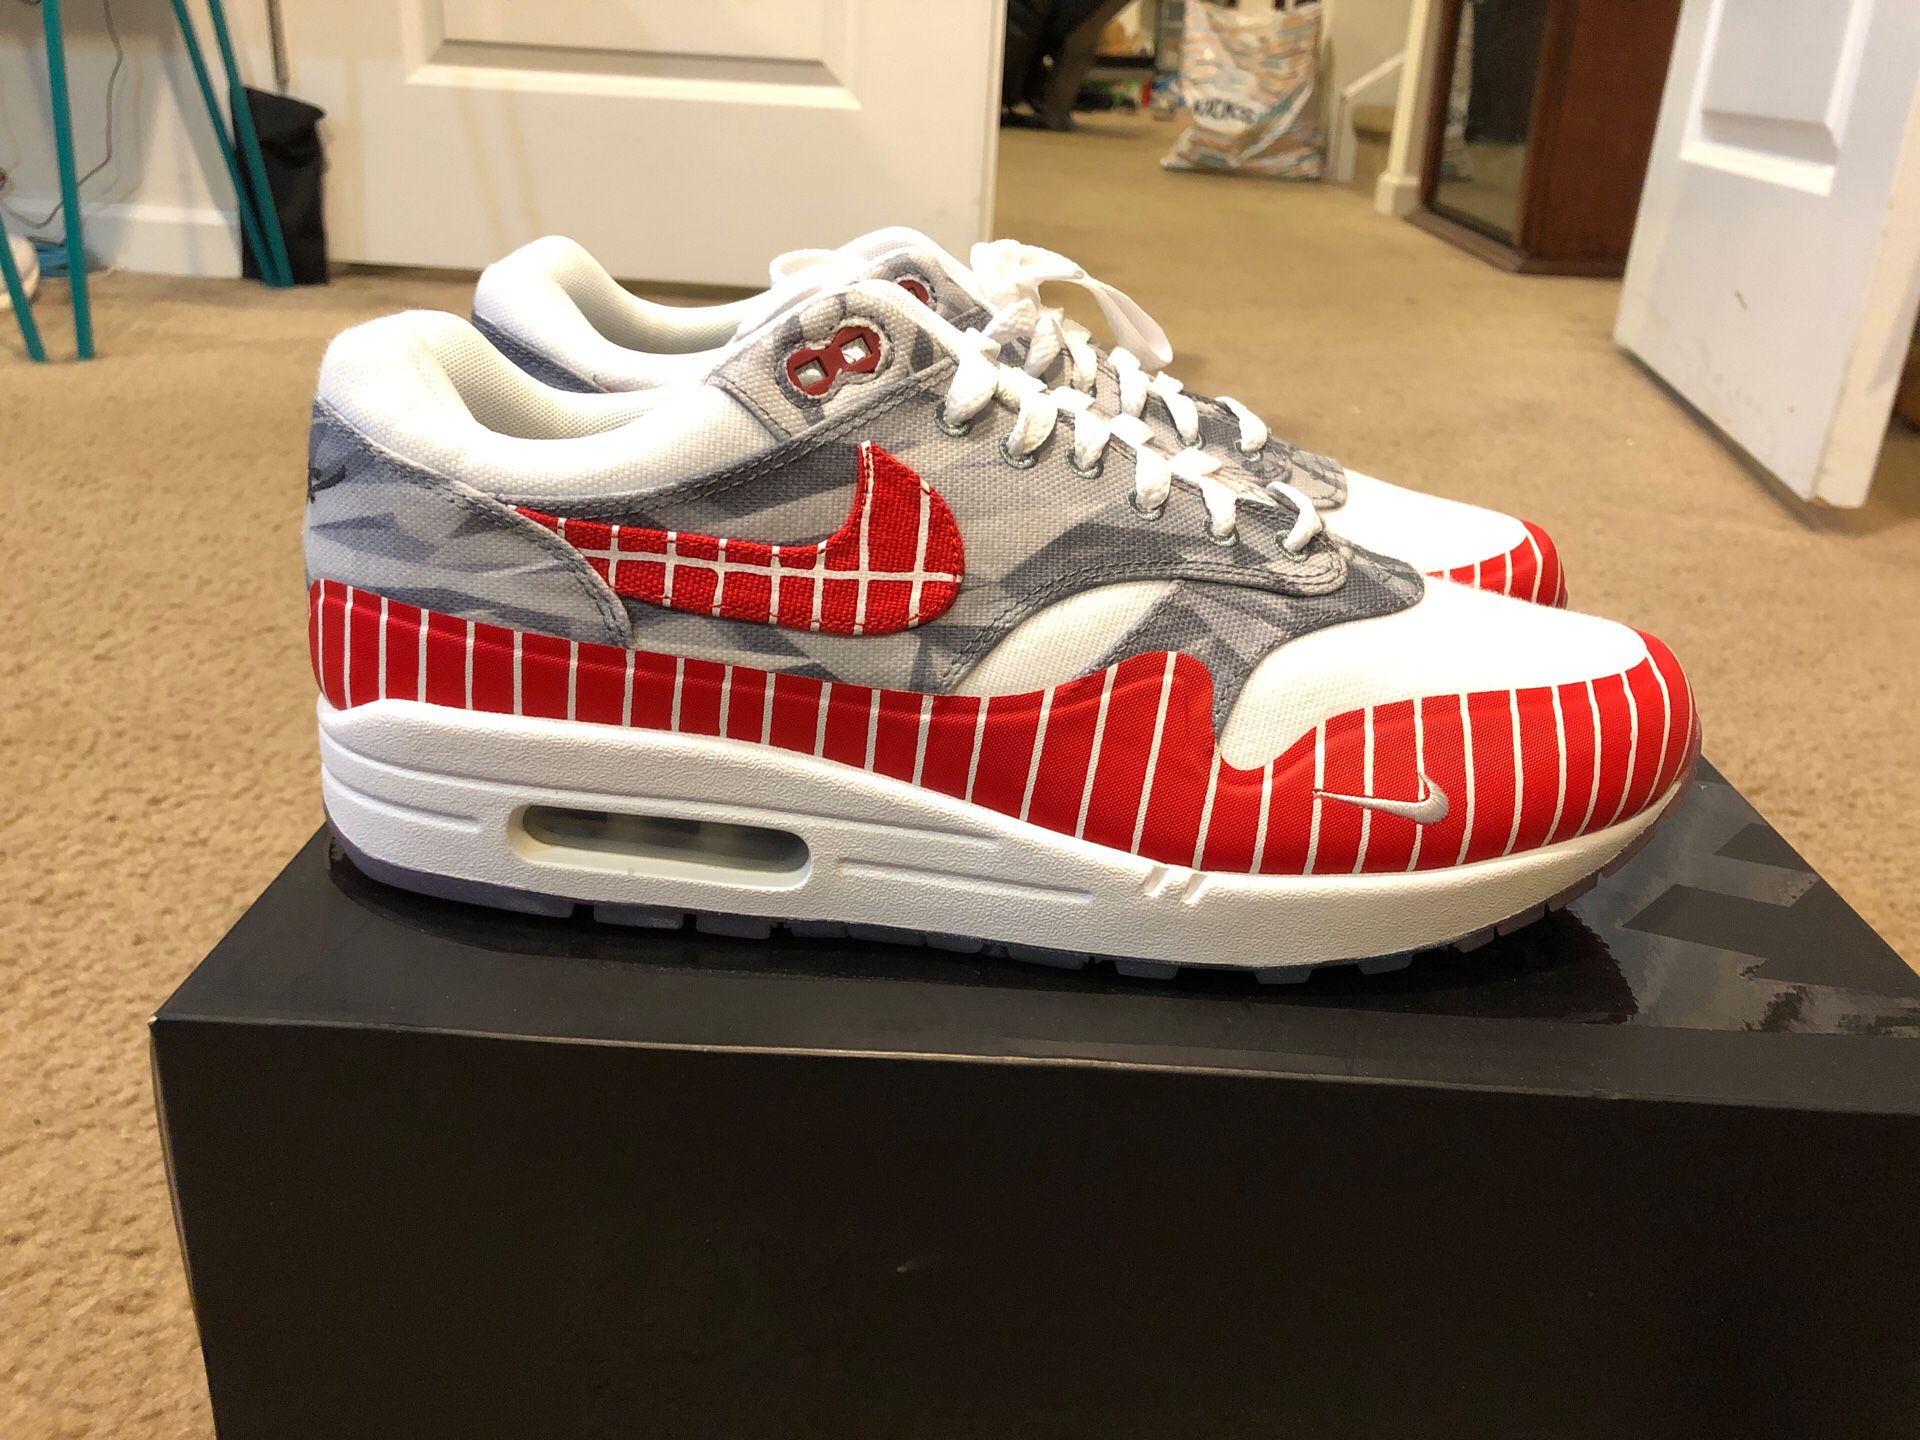 Air Max 1 'Nomad' x Wasafu for Sale in Egg Township, NJ - OfferUp